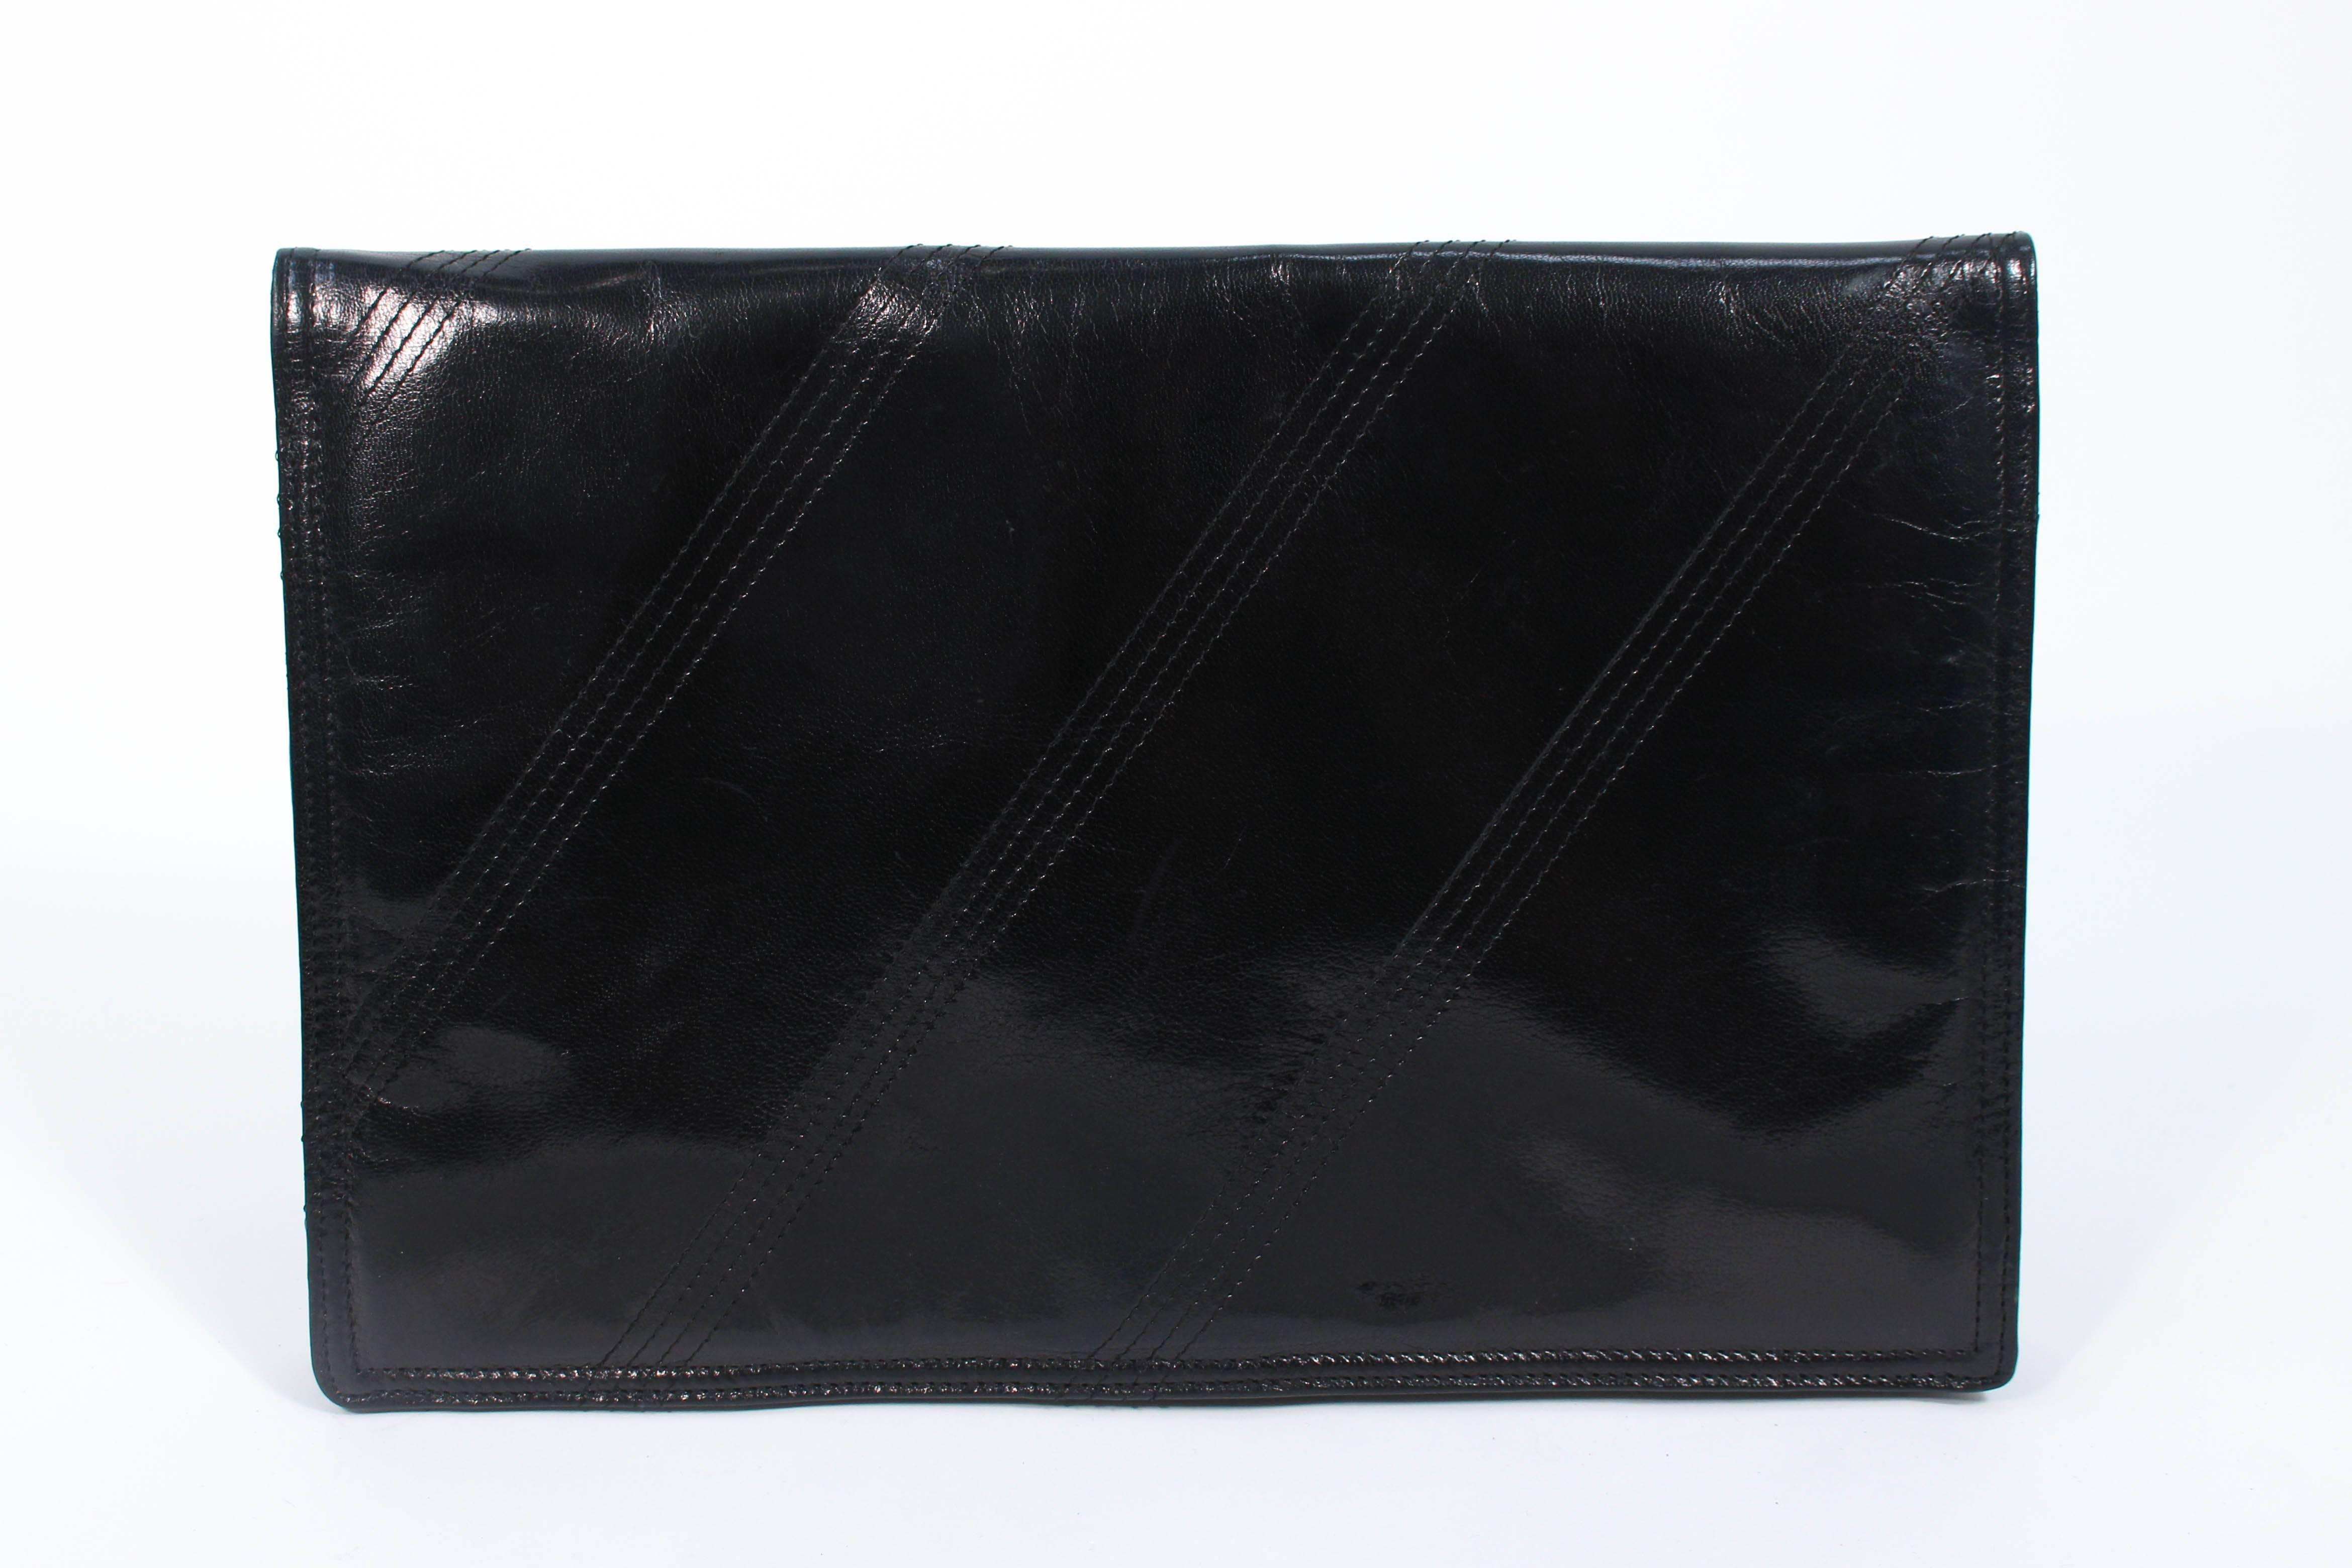 This Bottega Venta purse is composed of a polished black calfskin. Features top stitch details. There are multiple interior compartments as well as a zippered compartment. Made in France. In excellent vintage condition.

**Please cross-reference